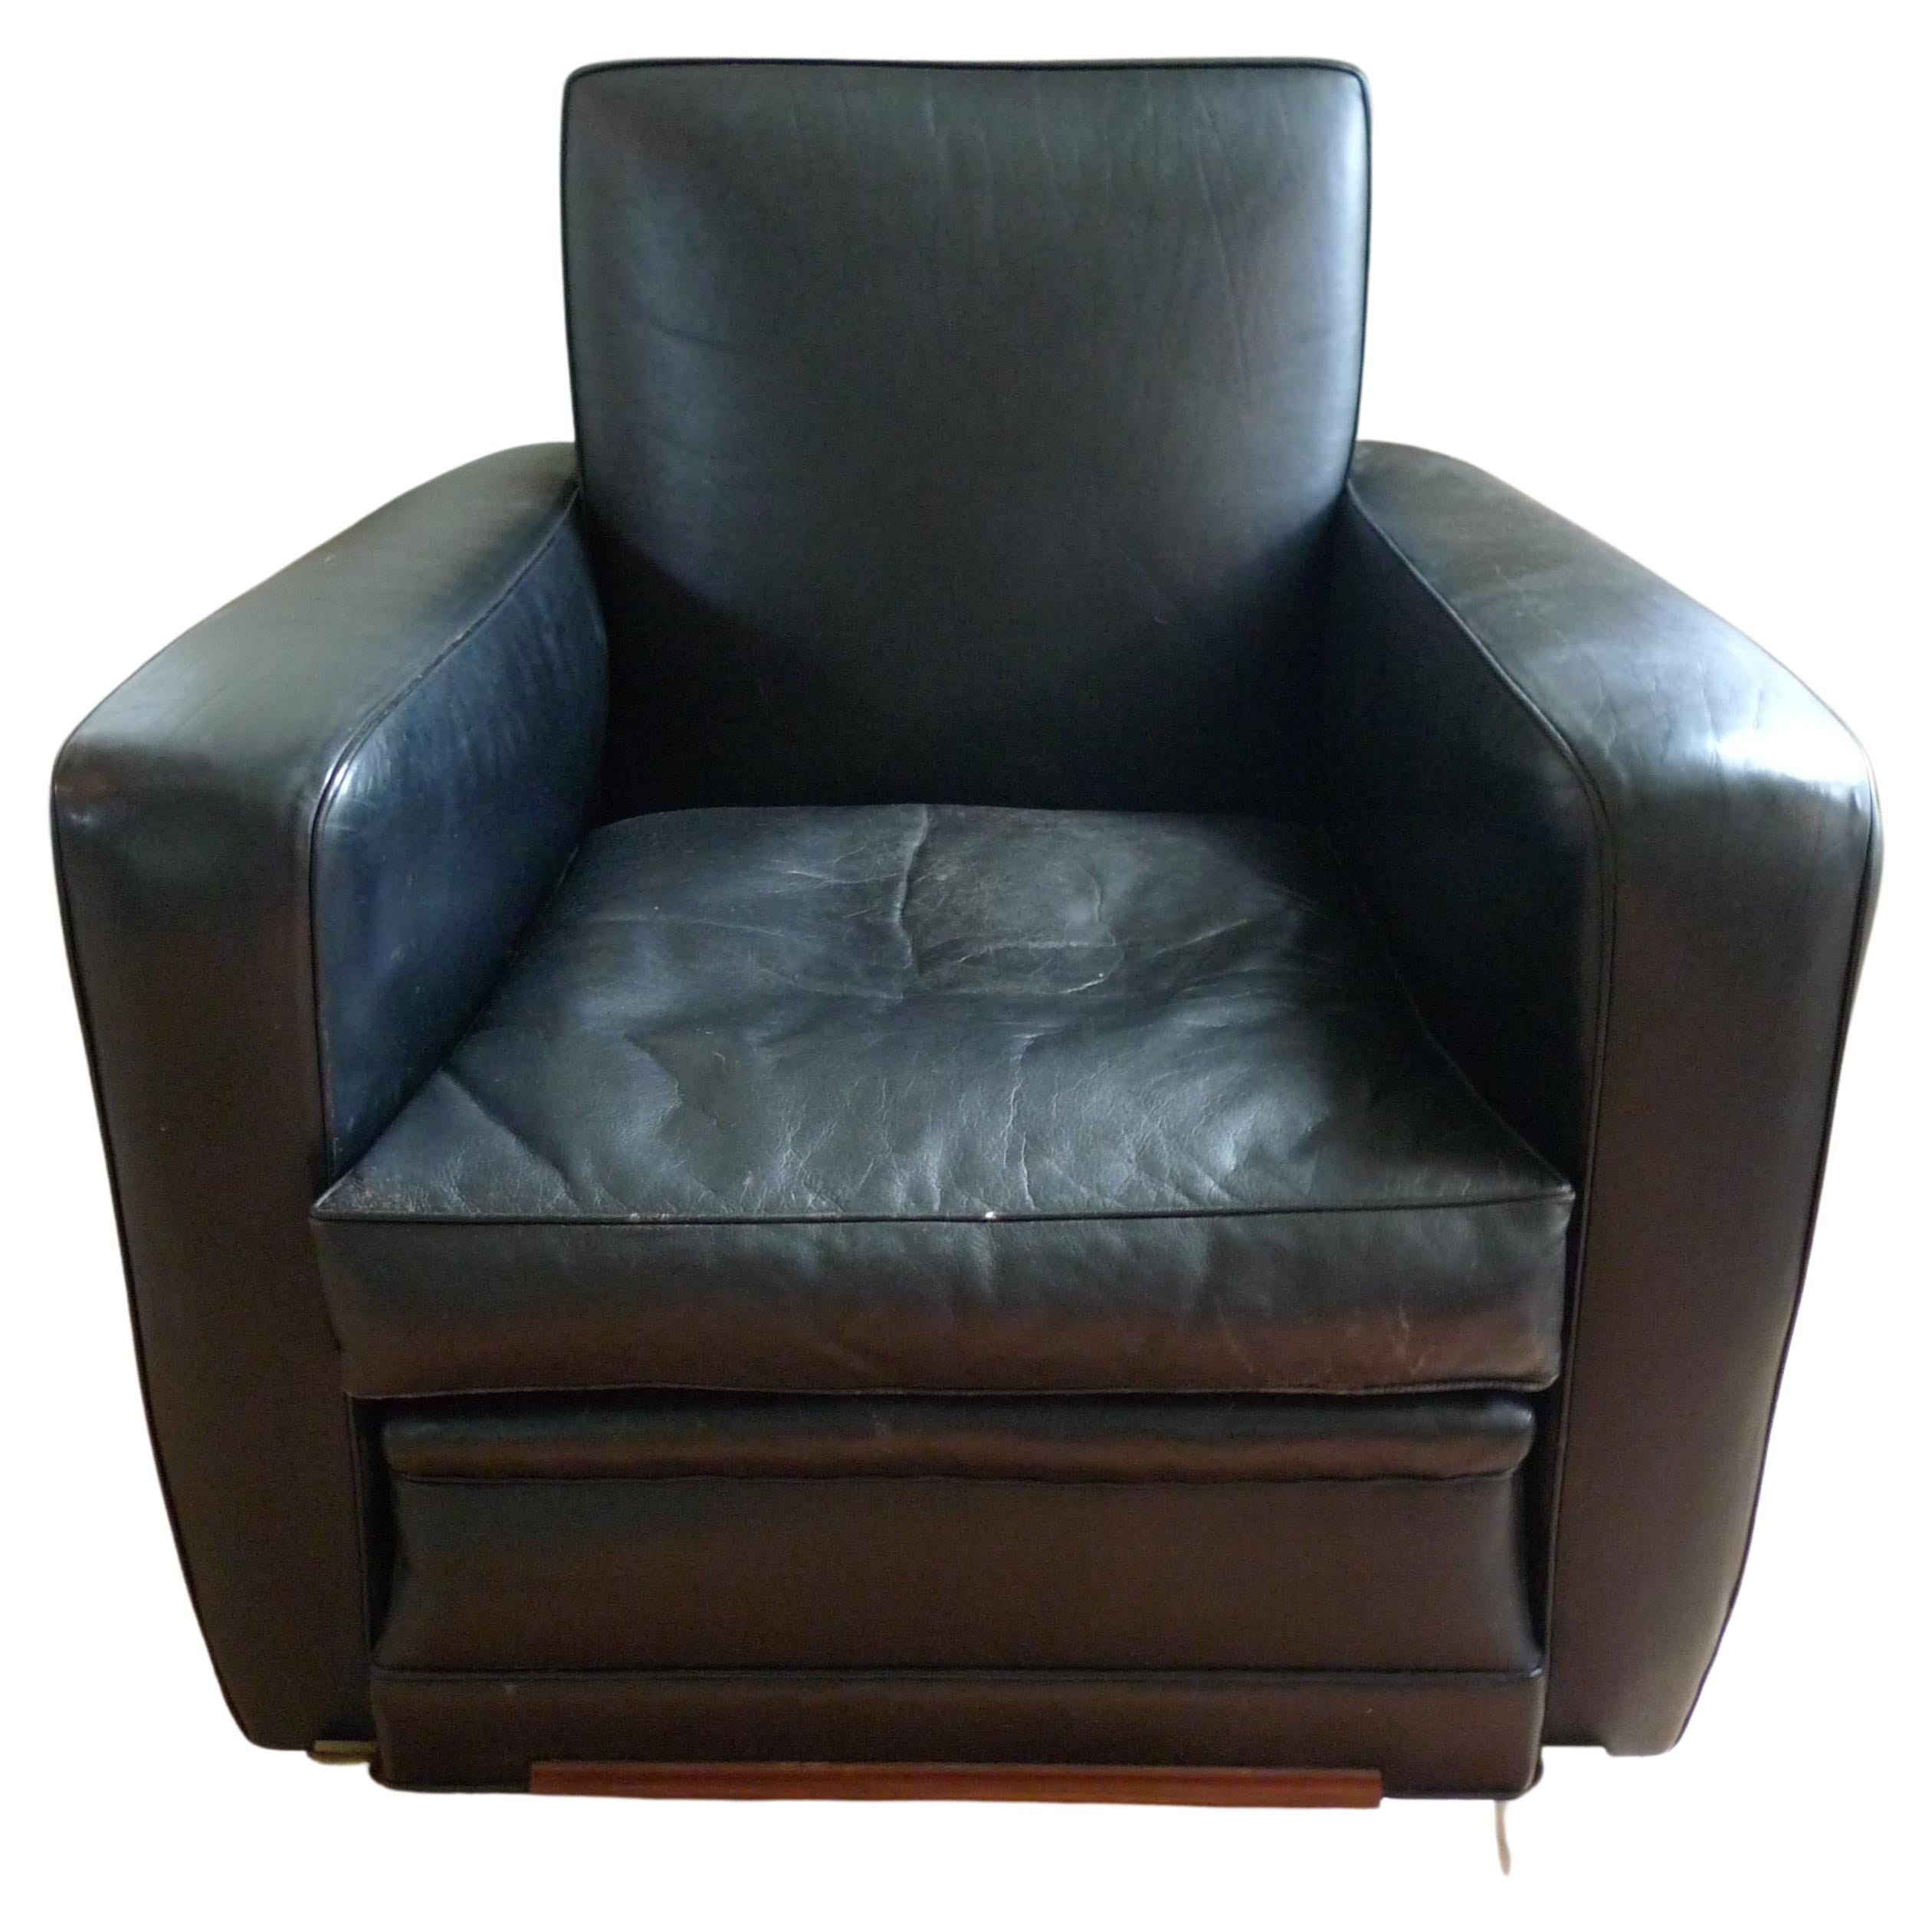 Club Lounge Chair, 1960s France, Black Leather. Manner of Emile-Jacques Ruhlmann